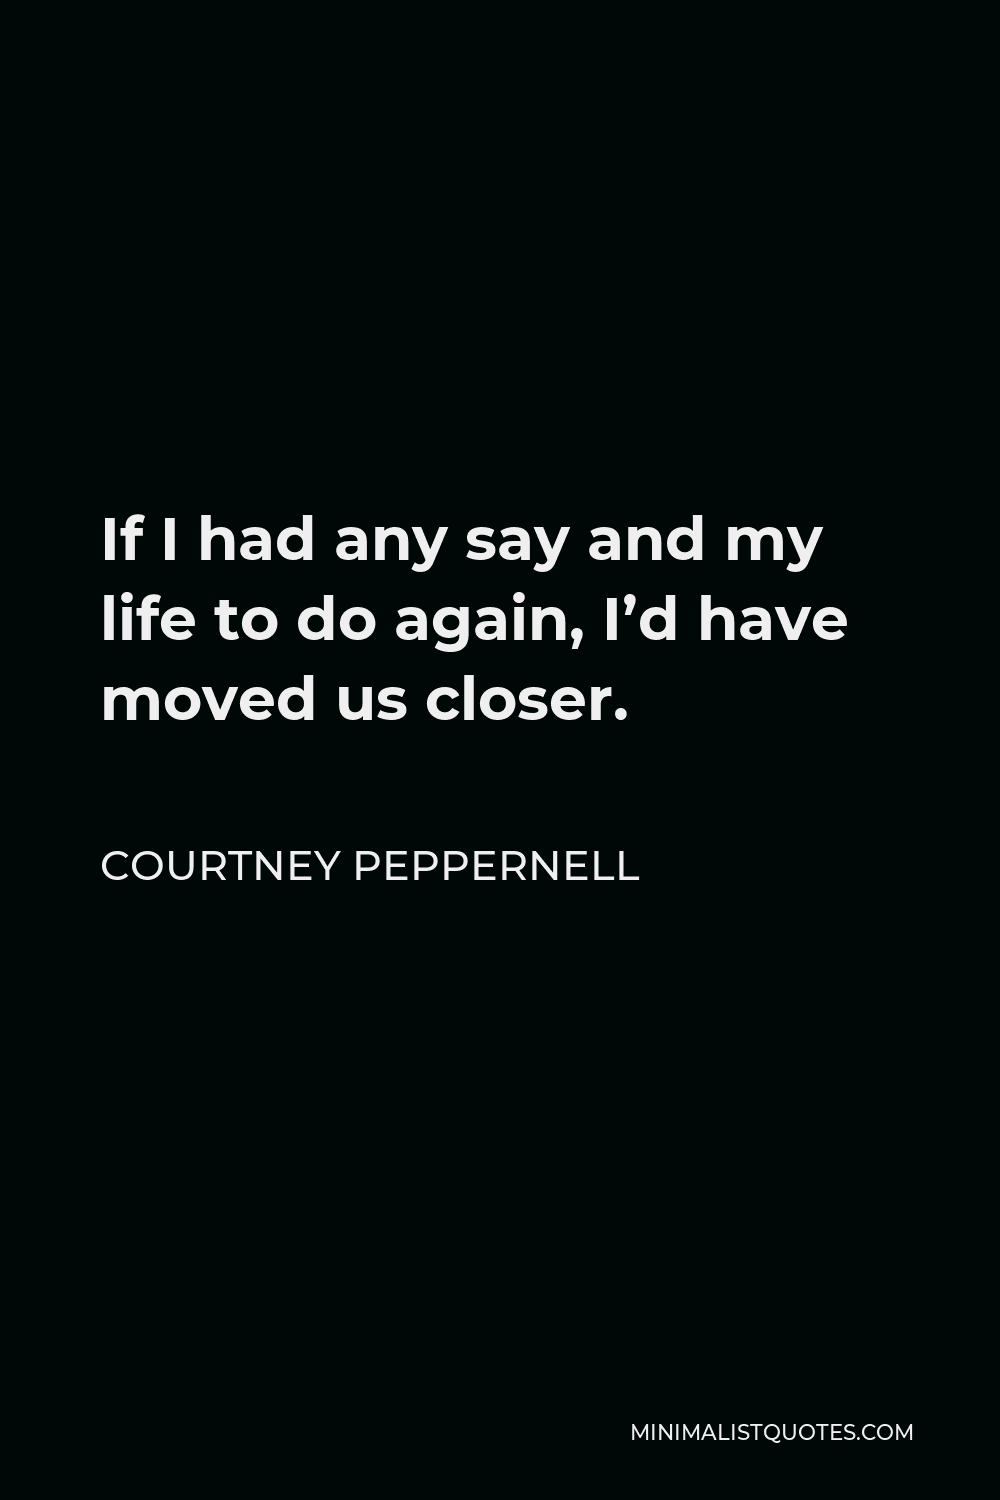 Courtney Peppernell Quote - If I had any say and my life to do again, I’d have moved us closer.